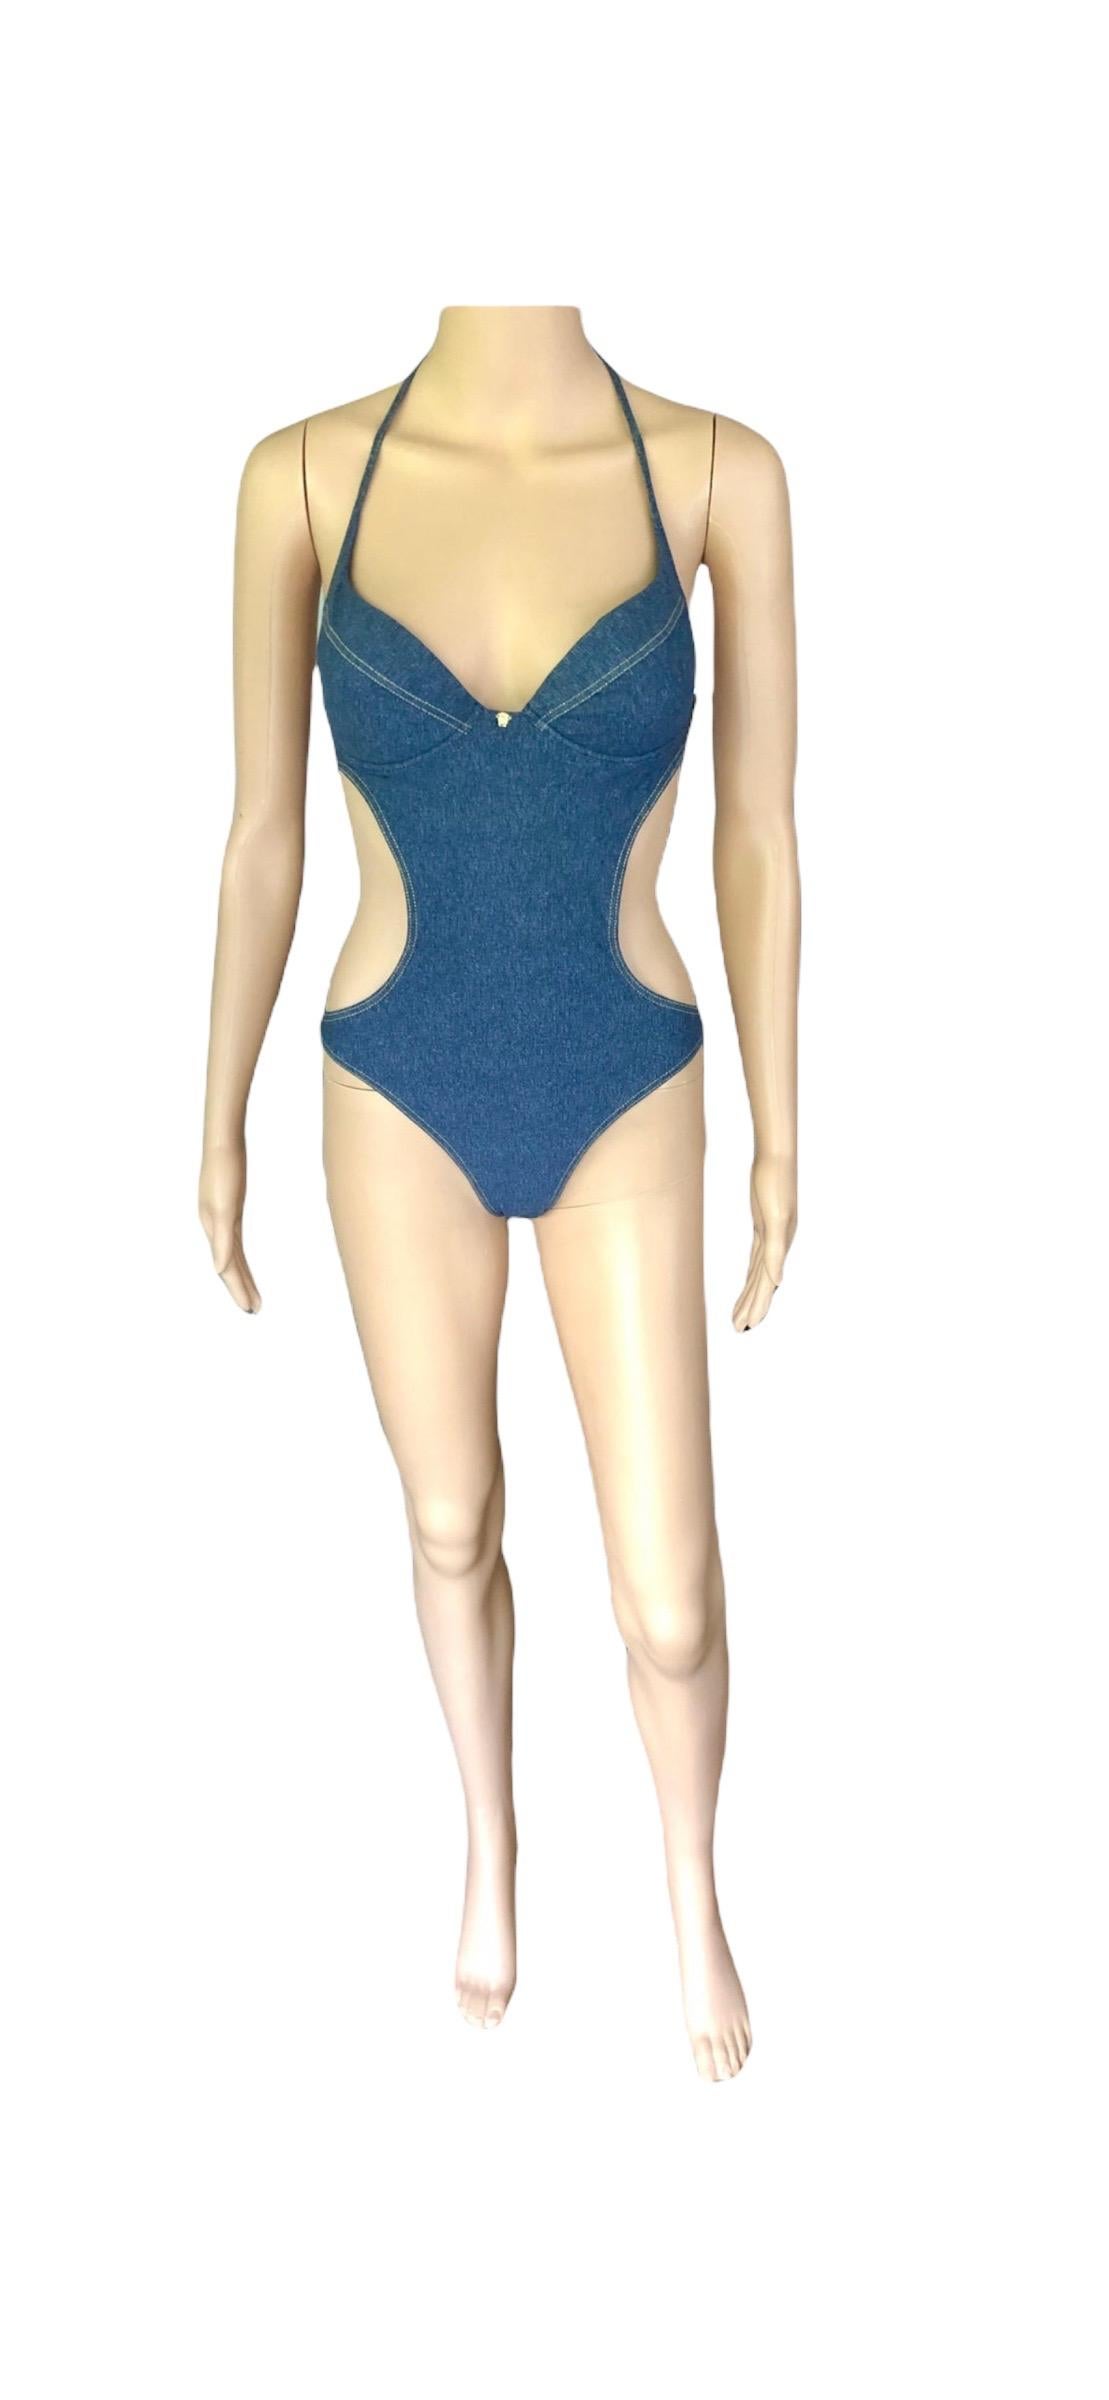 Versace Bustier Plunging Open Back Cutout Denim Print Swimwear Swimsuit In Excellent Condition For Sale In Naples, FL